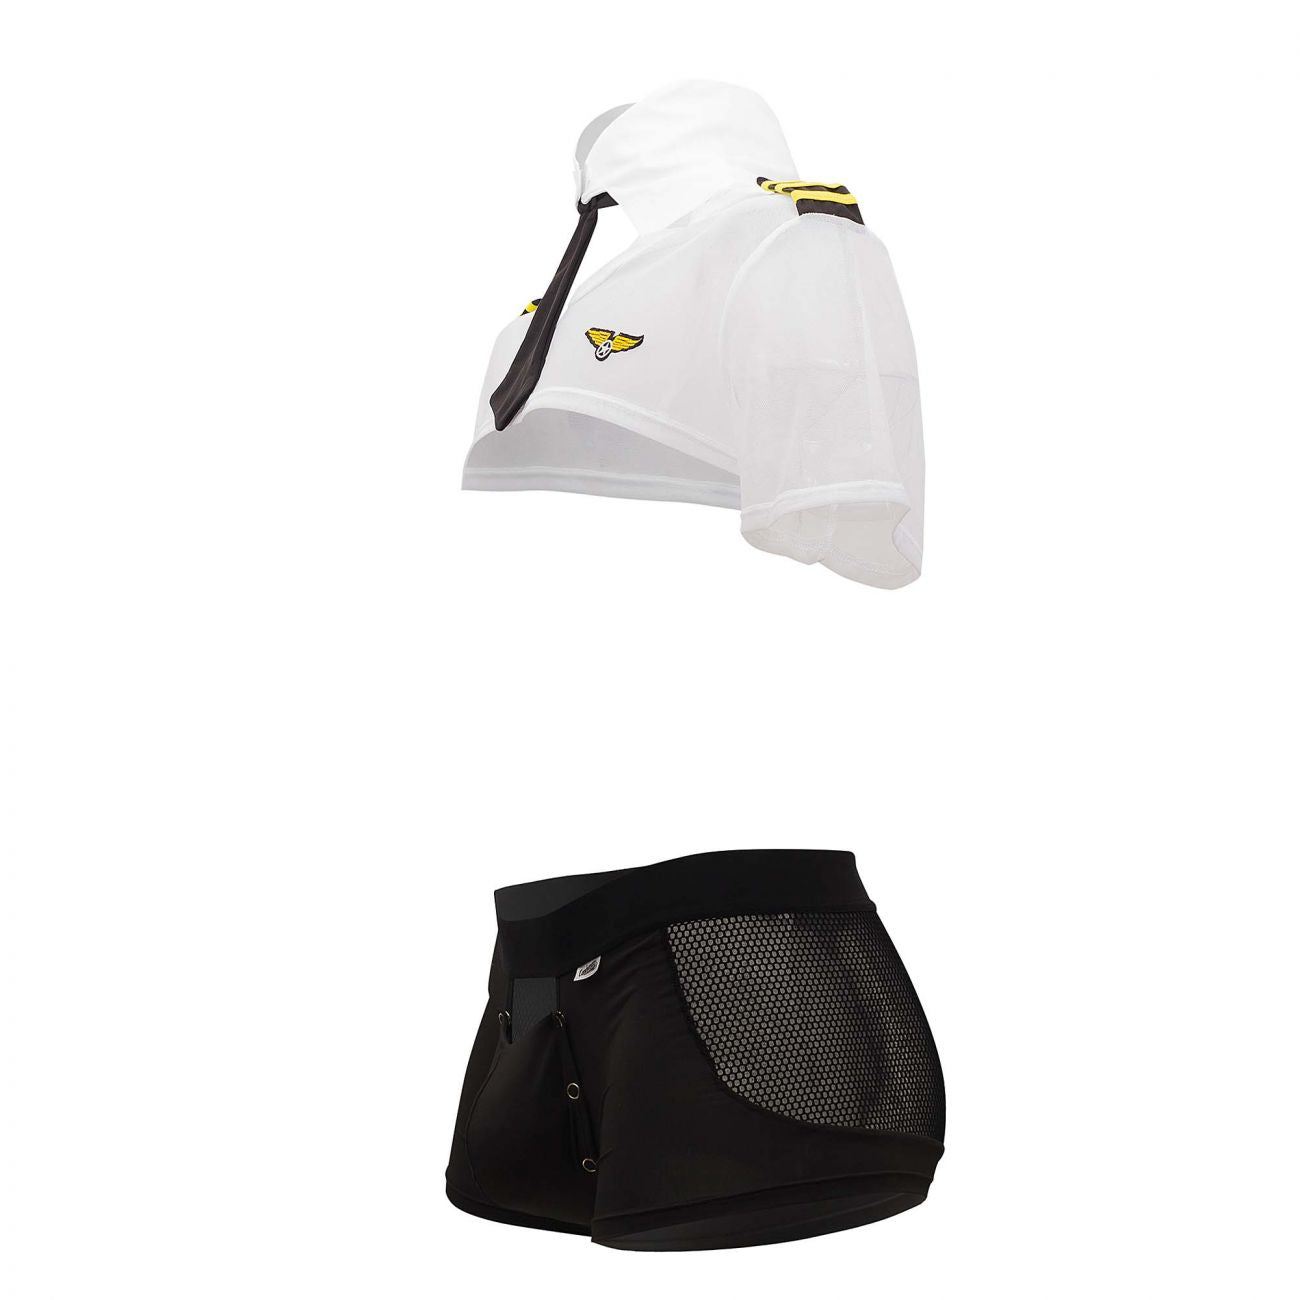 CandyMan 99561 Pilot Costume Outfit Color White-Black